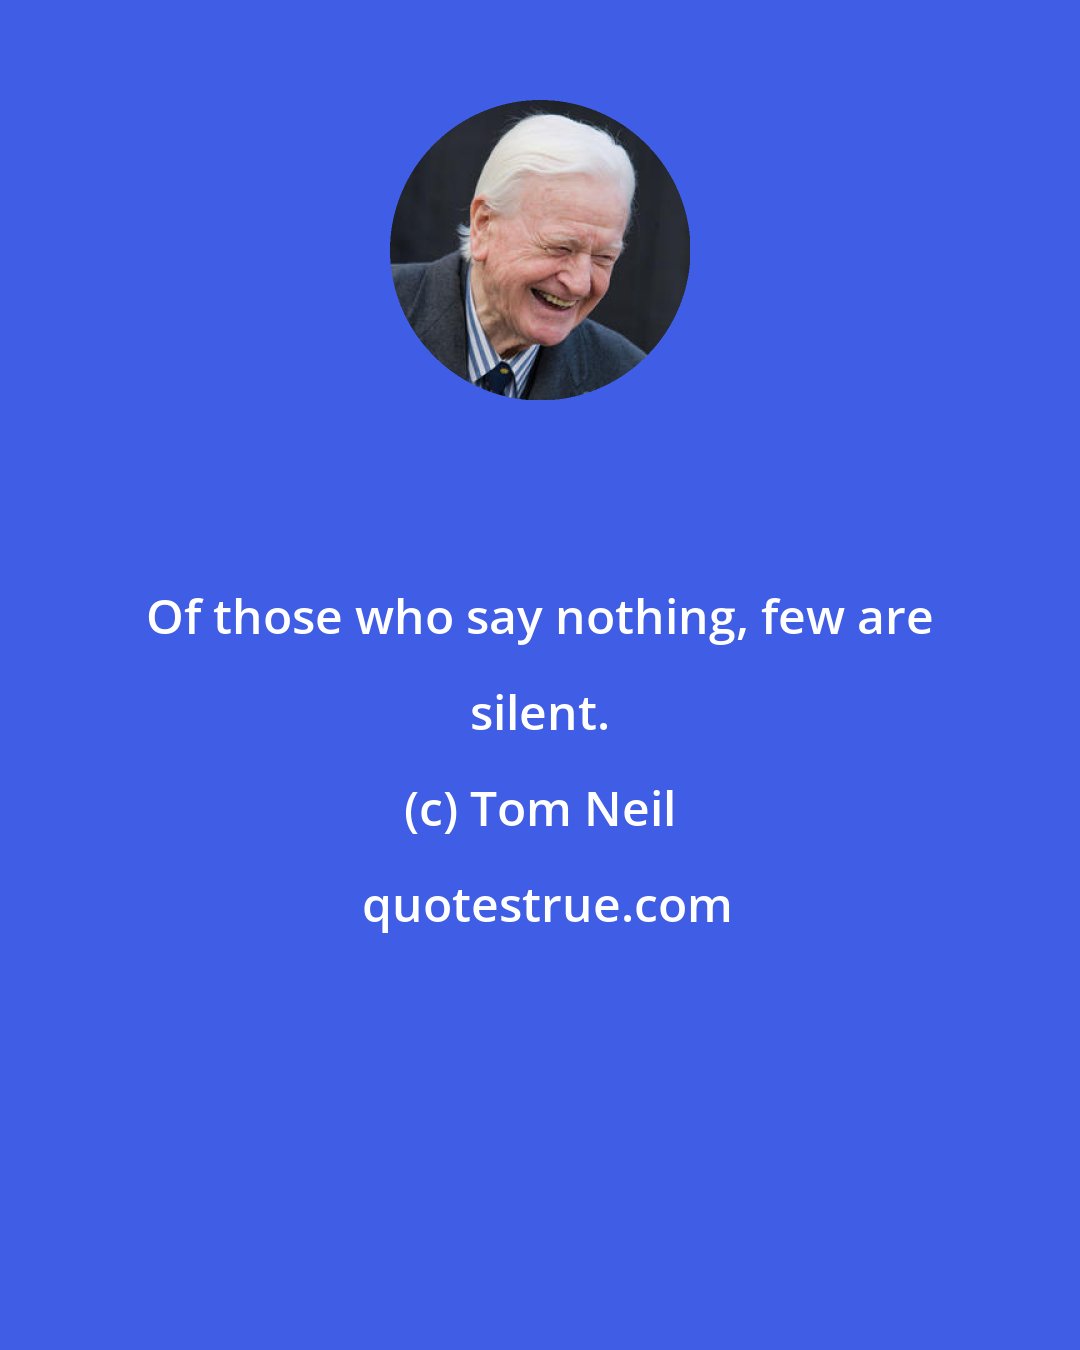 Tom Neil: Of those who say nothing, few are silent.